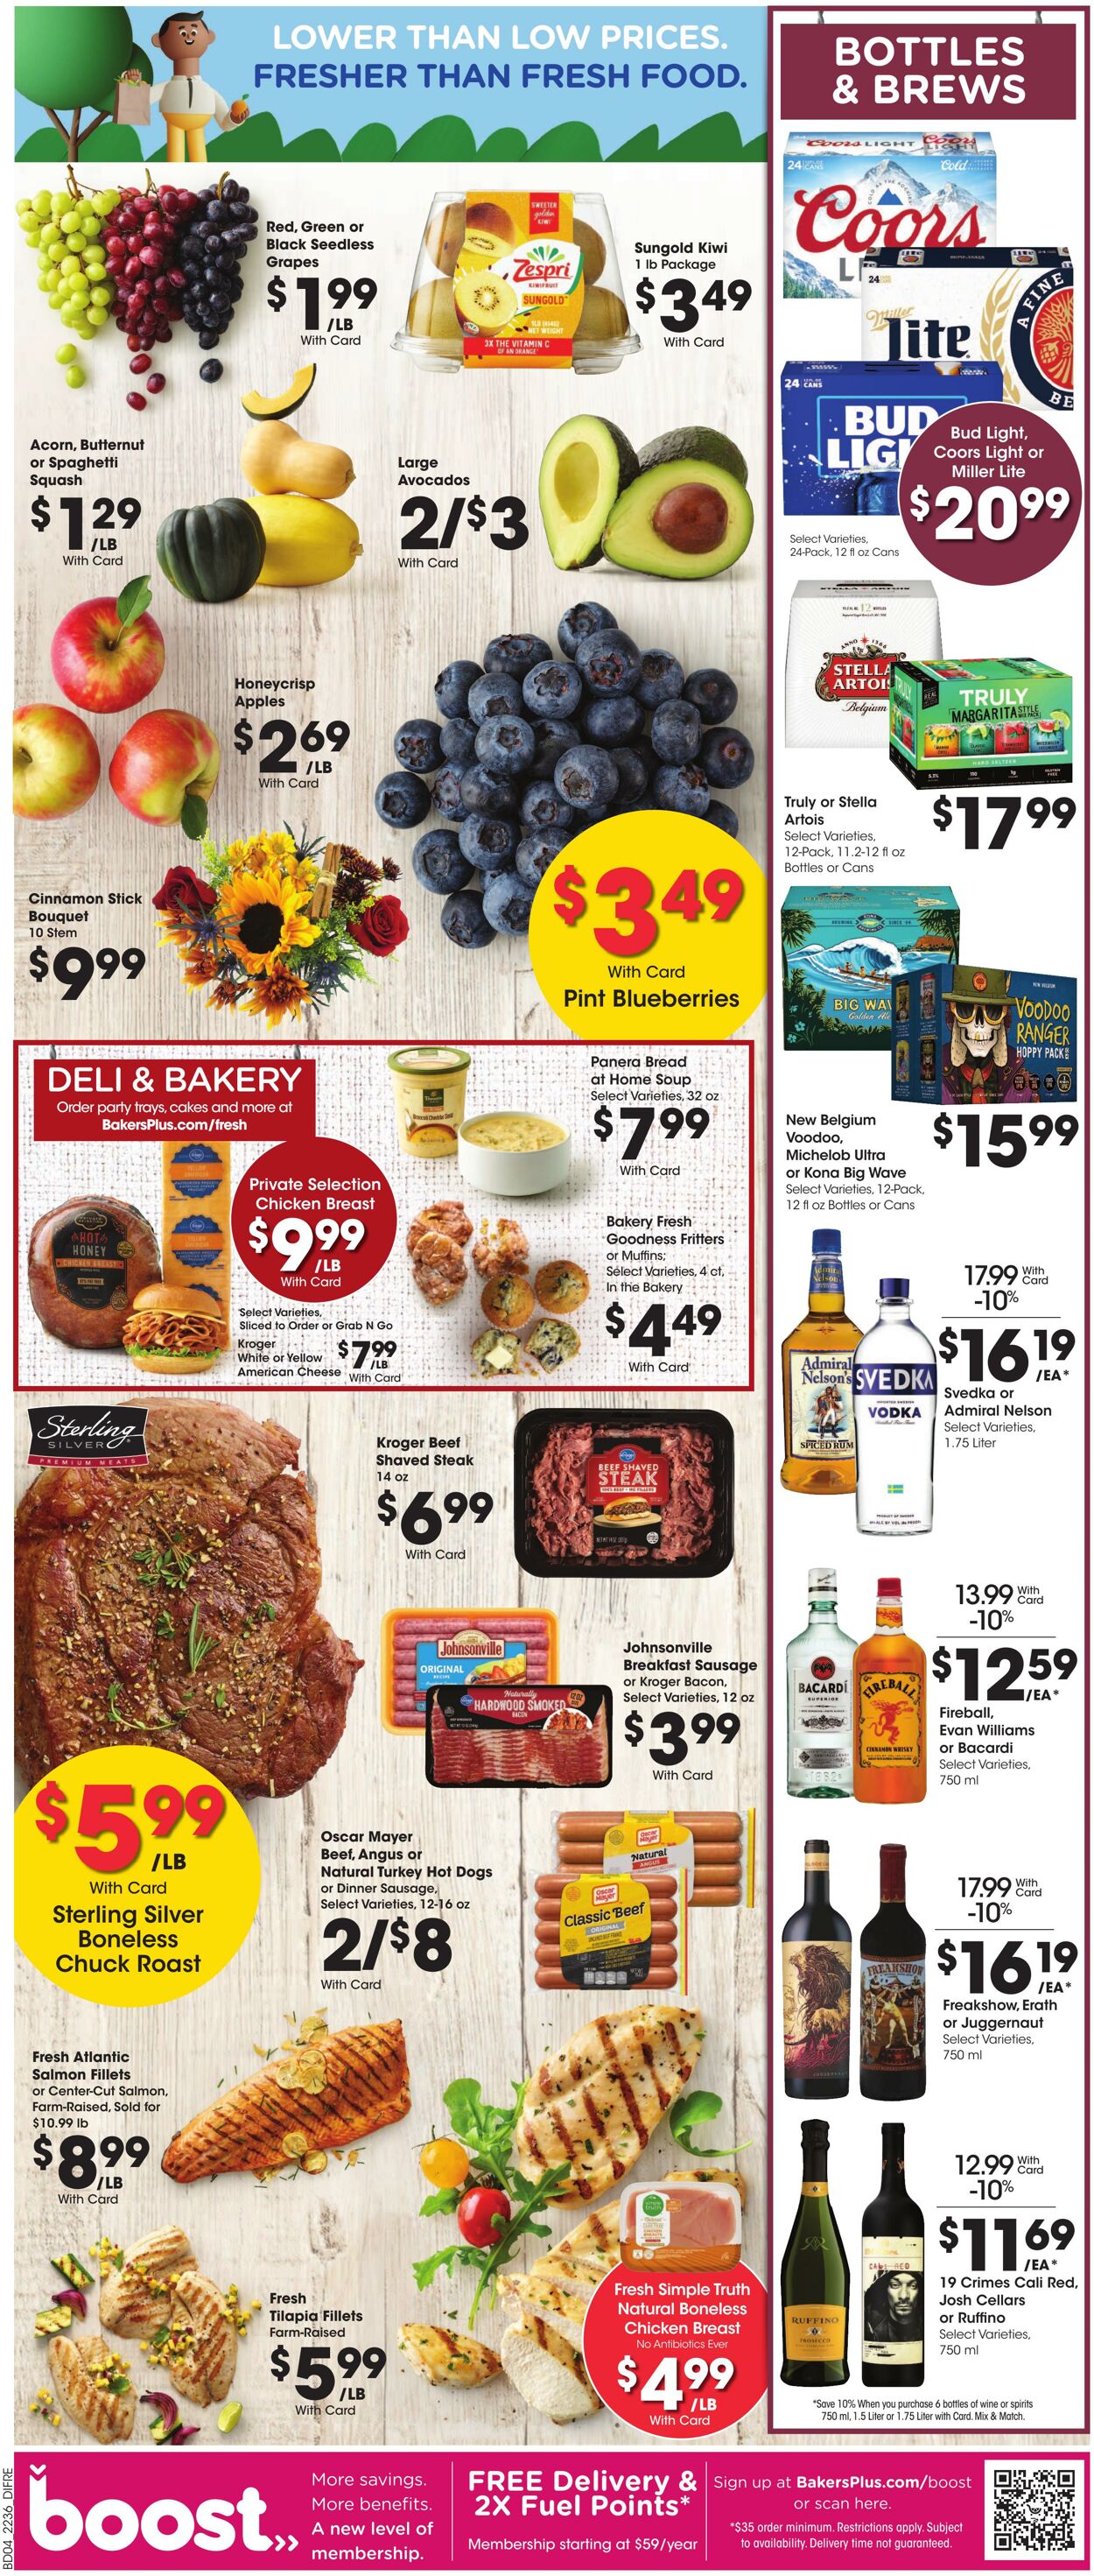 Weekly ad Baker's 10/05/2022 - 10/11/2022